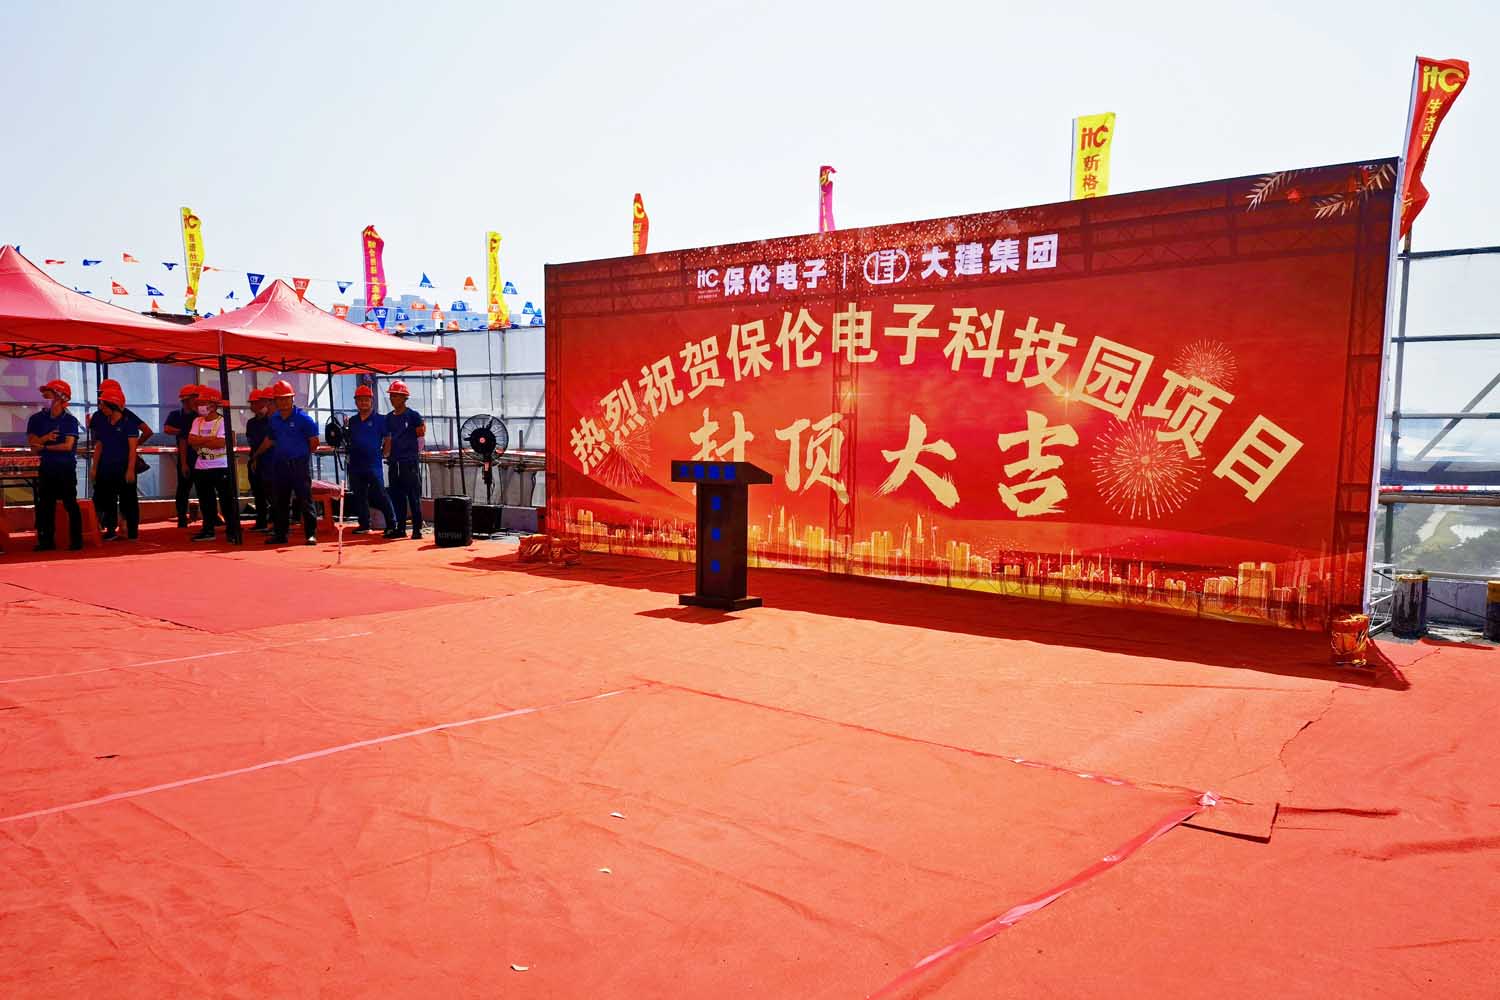 The Science and Technology Industrial Park project by Guangzhou Baolun Electronics Co., Ltd. (itc) met expectations and brought about a great topping-out! The itc Science and Technology Industrial Park's topping-out ceremony took place on the morning of September 25. 